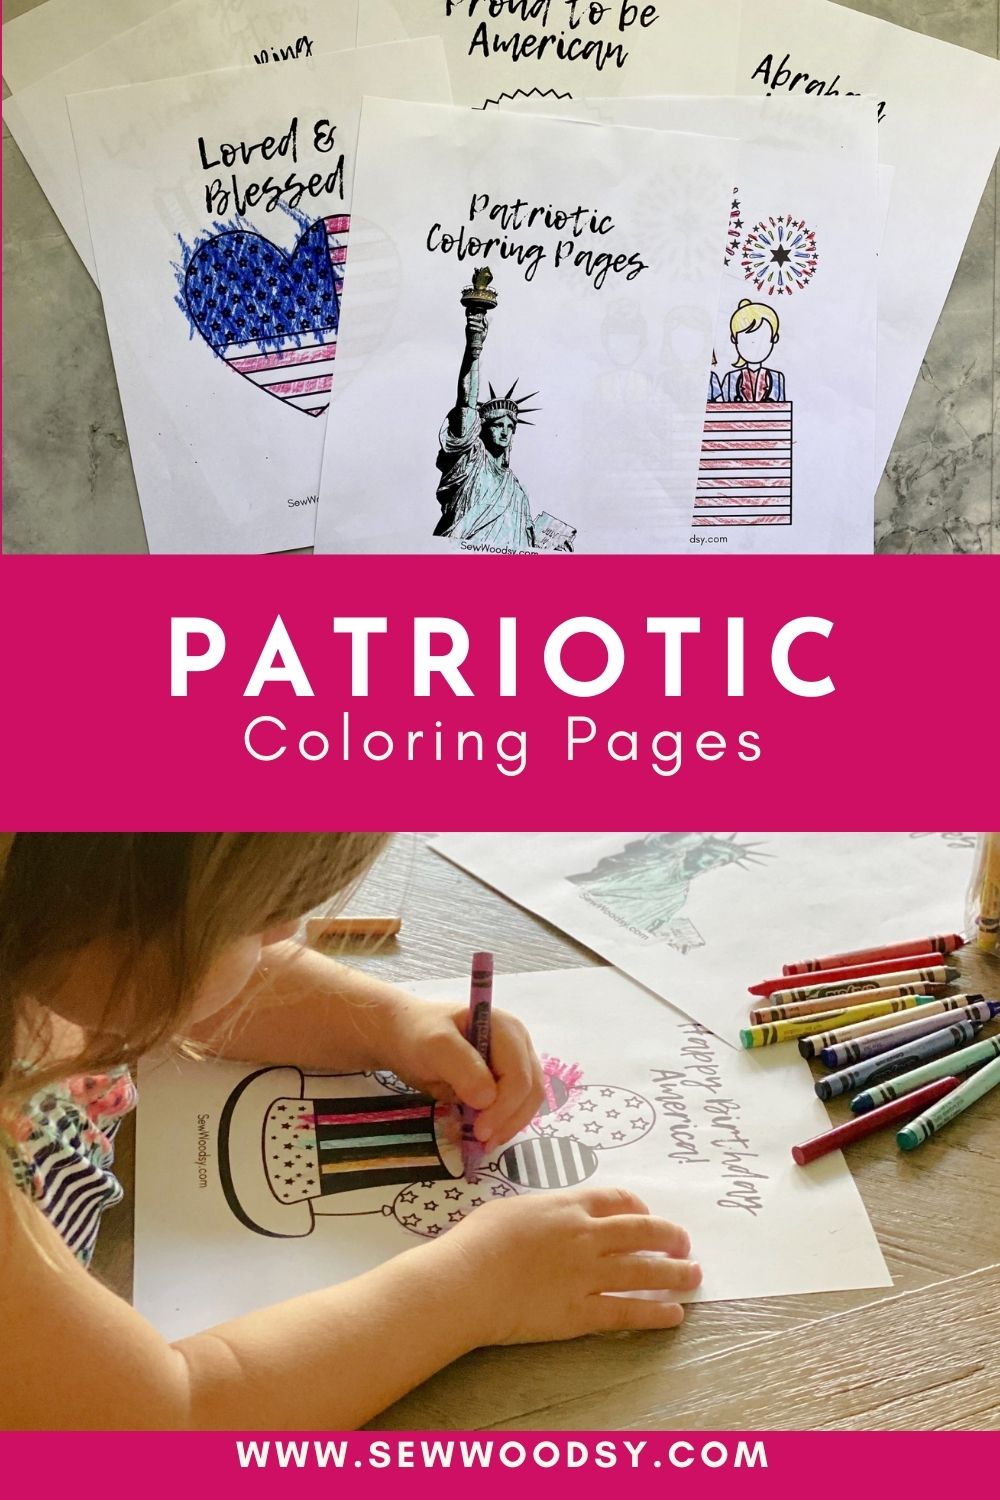 There are two photos; on the top photo there are patriotic coloring pages found out with a American flag heart on the left, Statue of Liberty in the middle and people with fireworks in the background on the right; on the second photo at the bottom there's a little girl coloring in one of the coloring pages